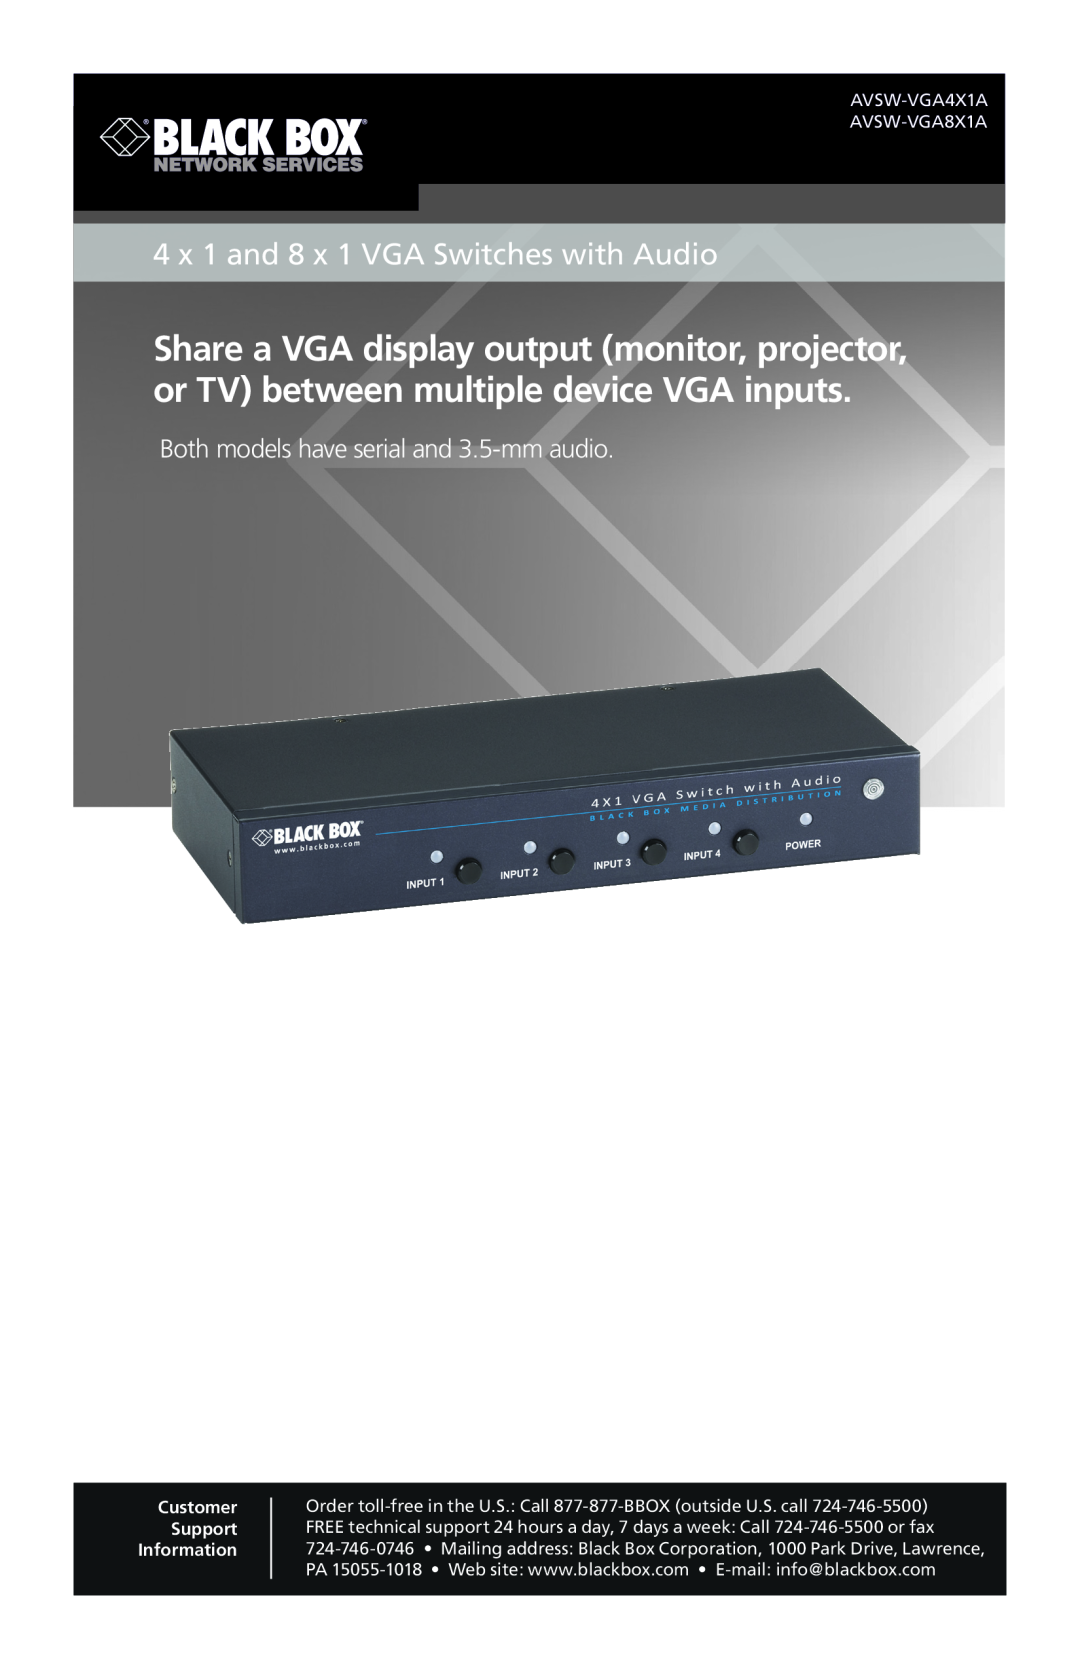 Black Box AVSW-VGA4X1A manual 4 x 1 and 8 x 1 VGA Switches with Audio, Both models have serial and 3.5-mm audio 